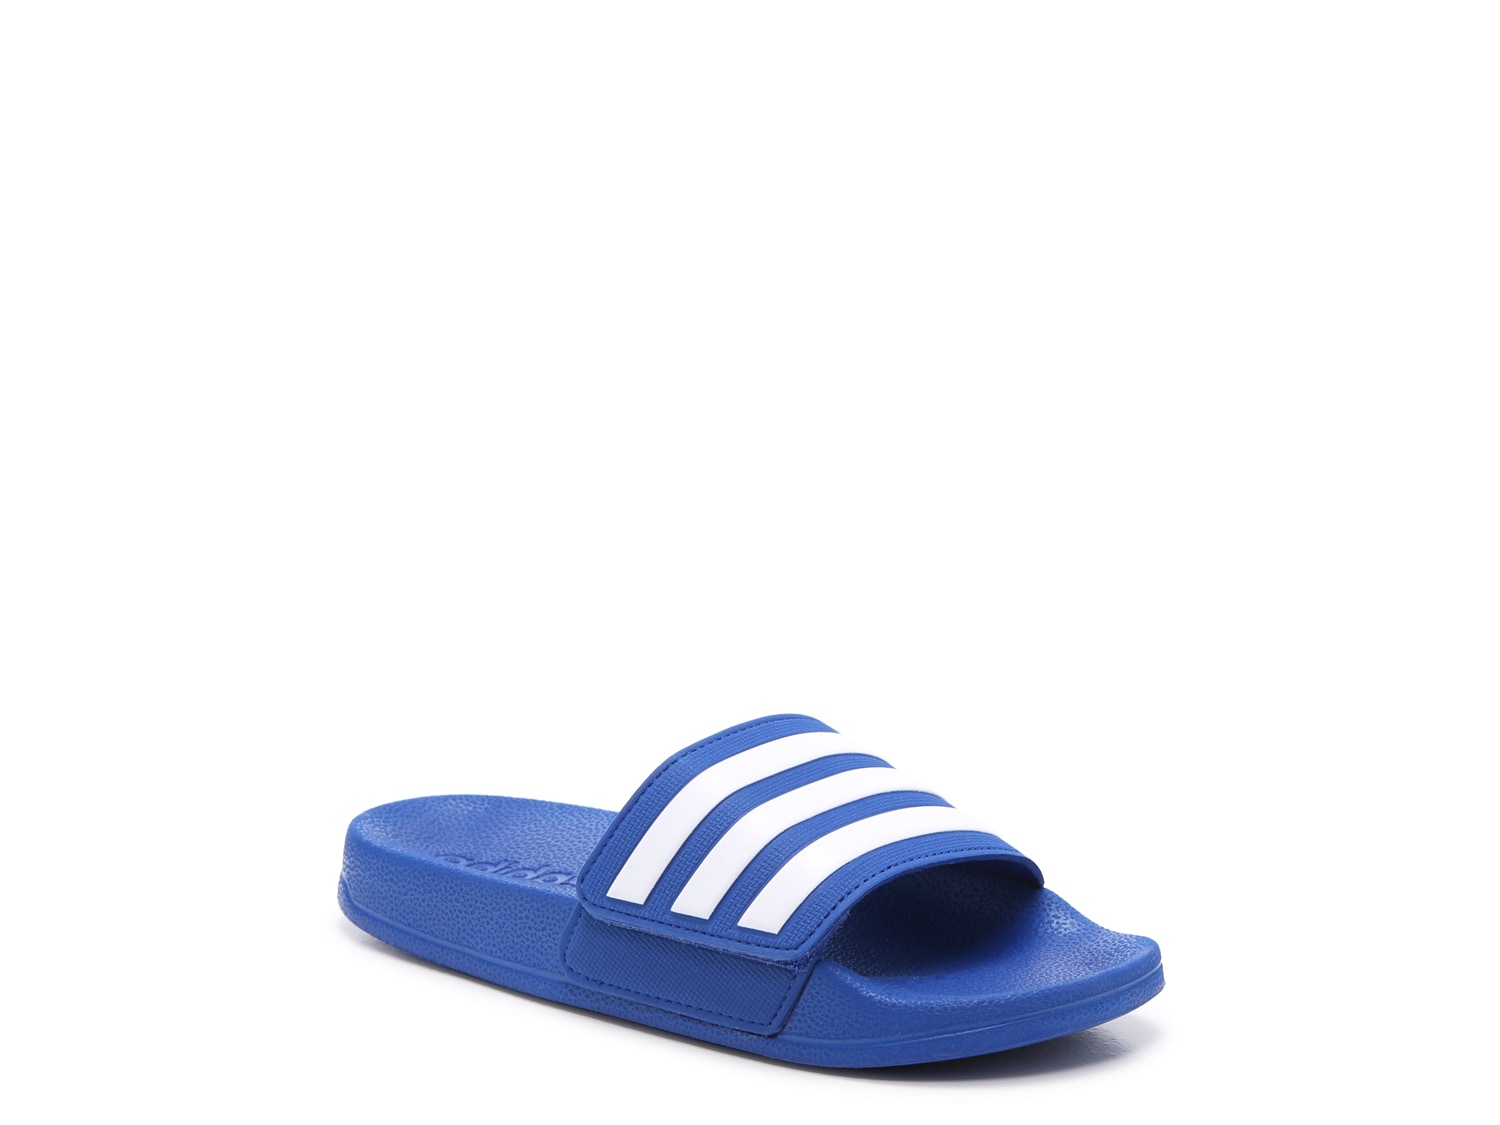 adidas sandals for babies